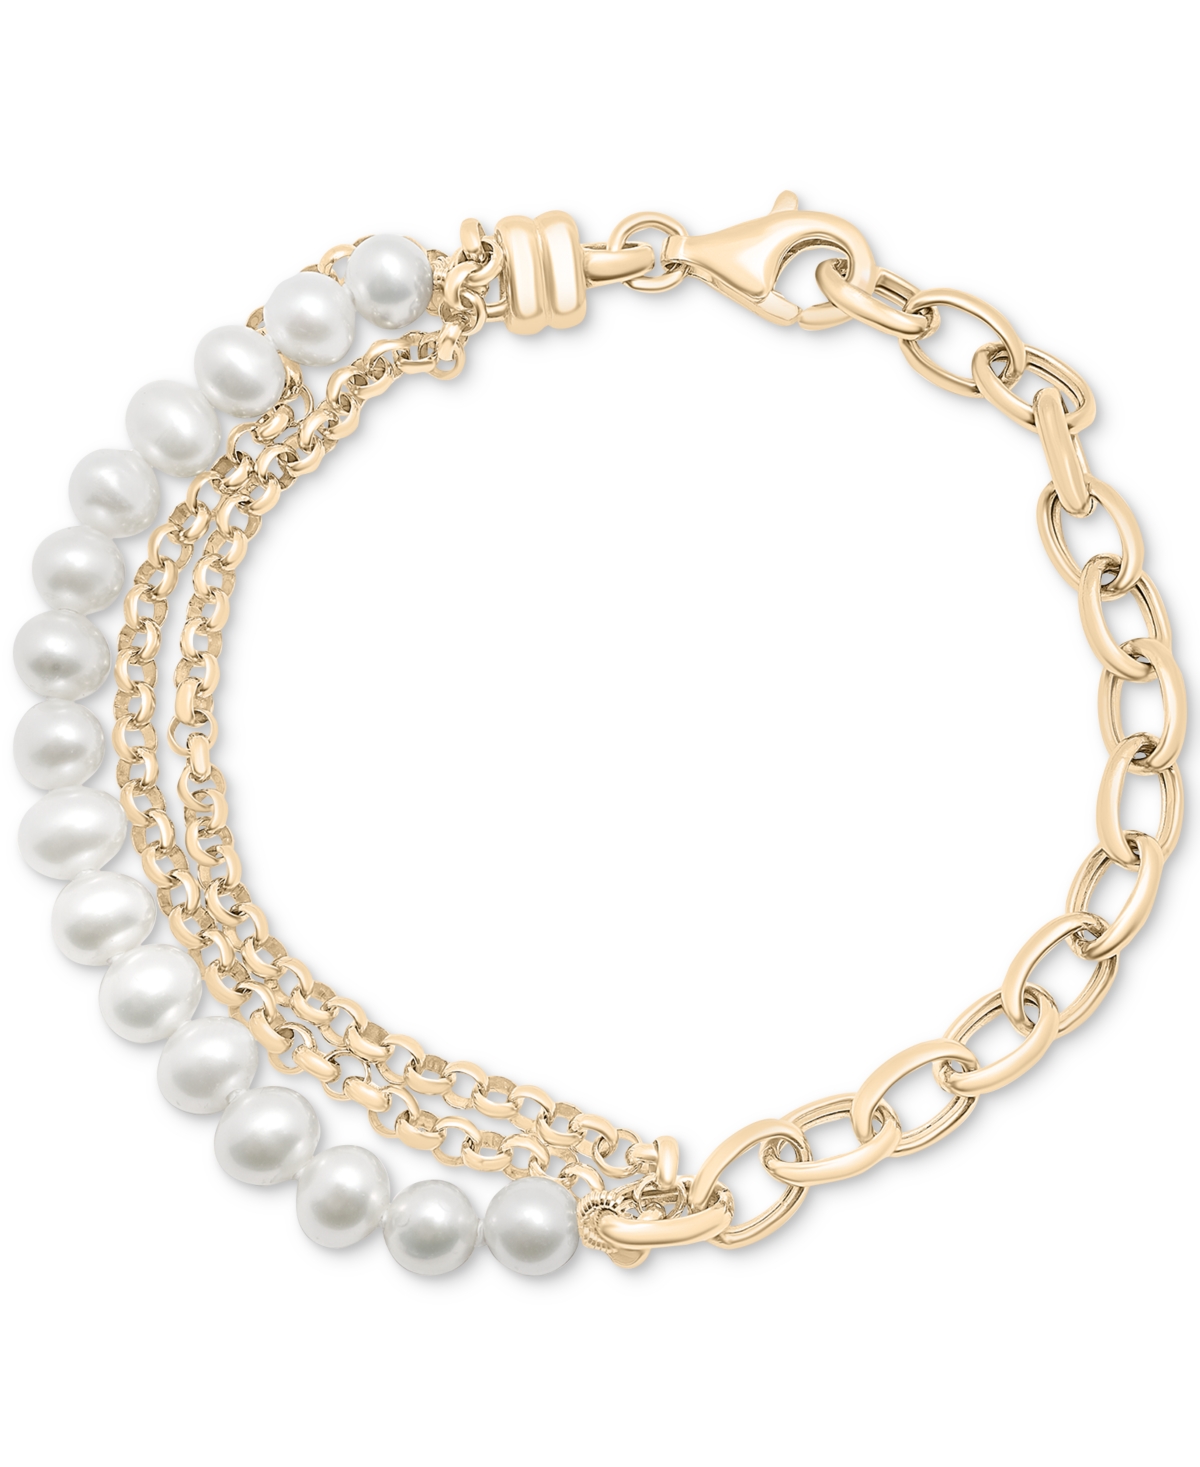 Cultured Freshwater Pearl (5mm) Triple & Single Link Bracelet in Gold Vermeil, Created for Macy's - Gold Vermeil